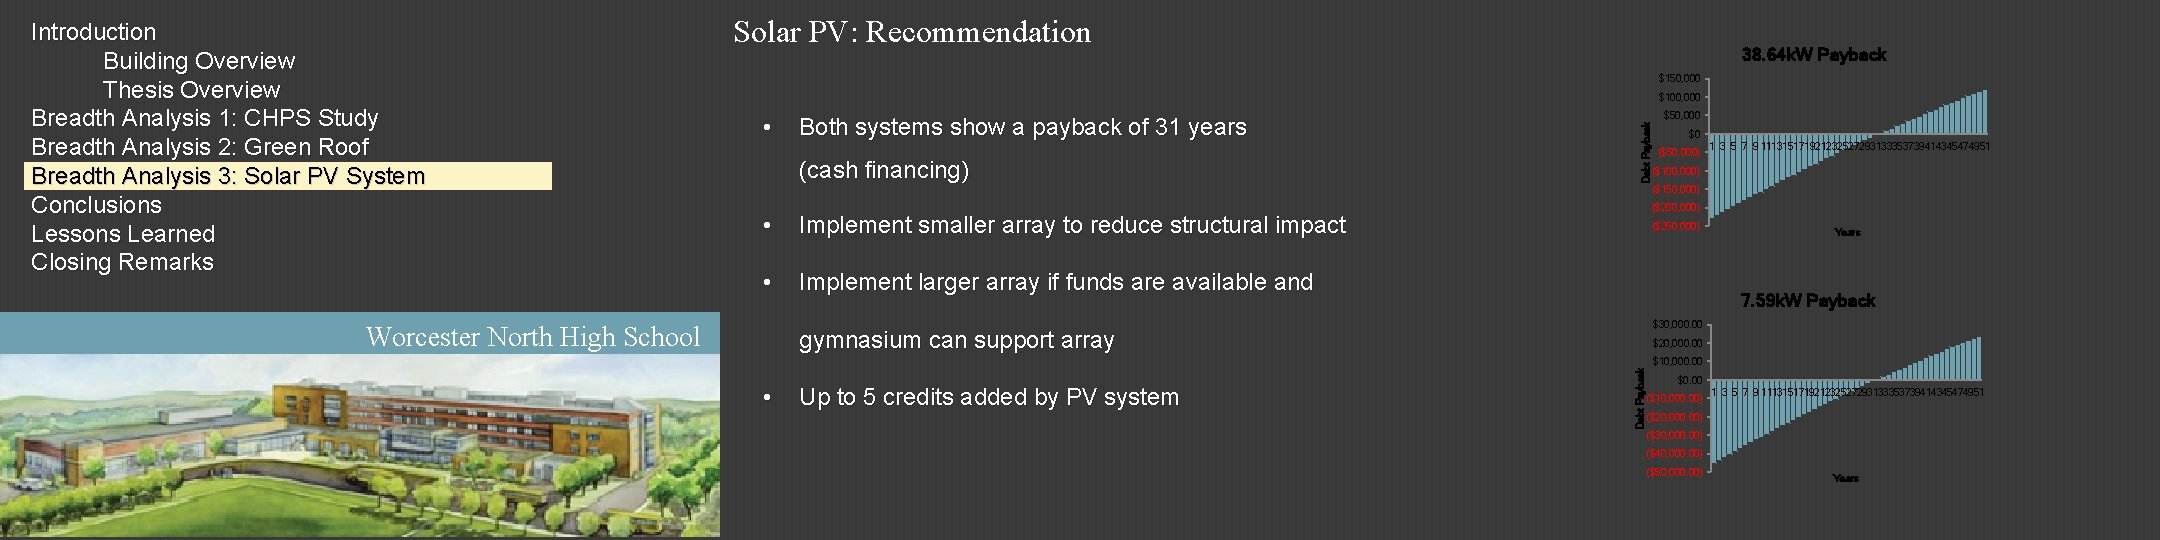 Solar PV: Recommendation 38. 64 k. W Payback $150, 000 • Both systems show